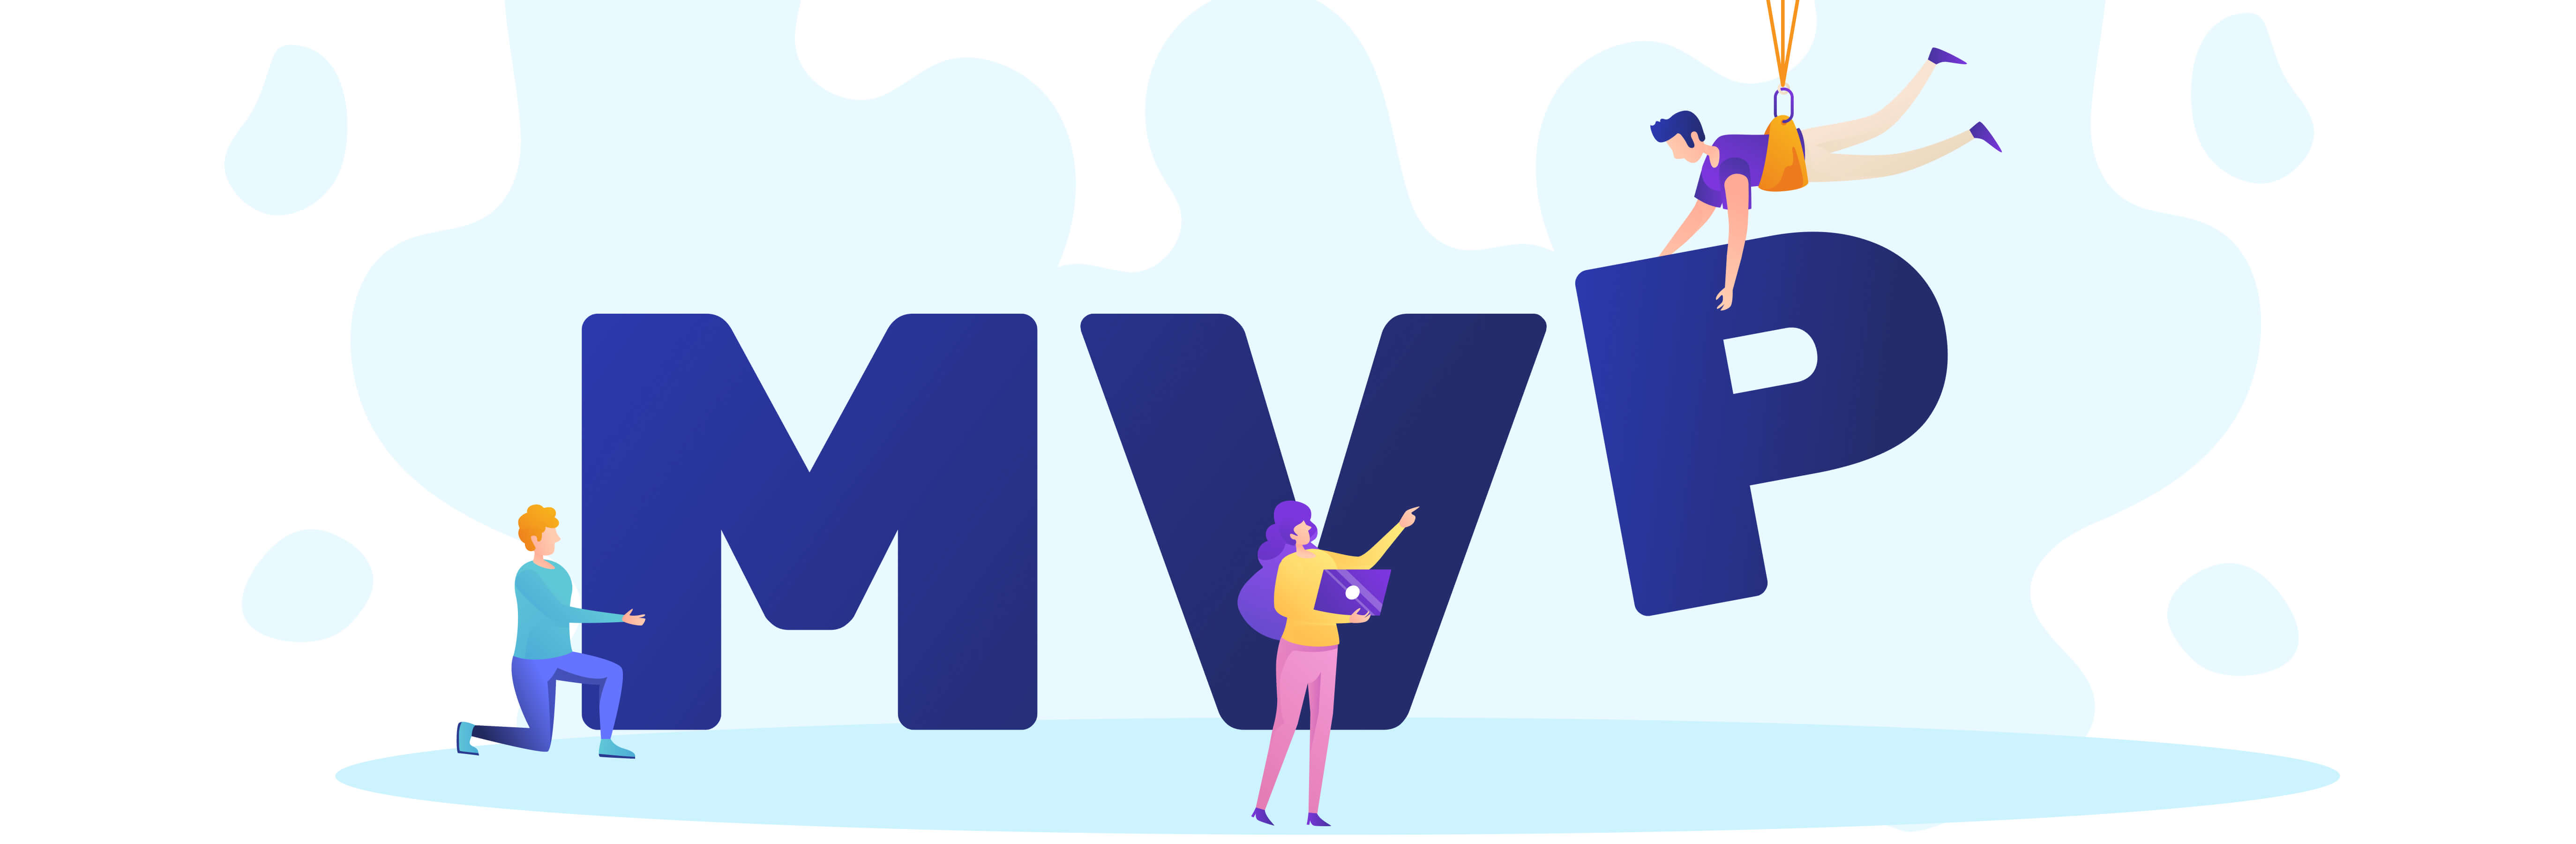 What’s an MVP? Why do I need one for my start-up? How do I build one?